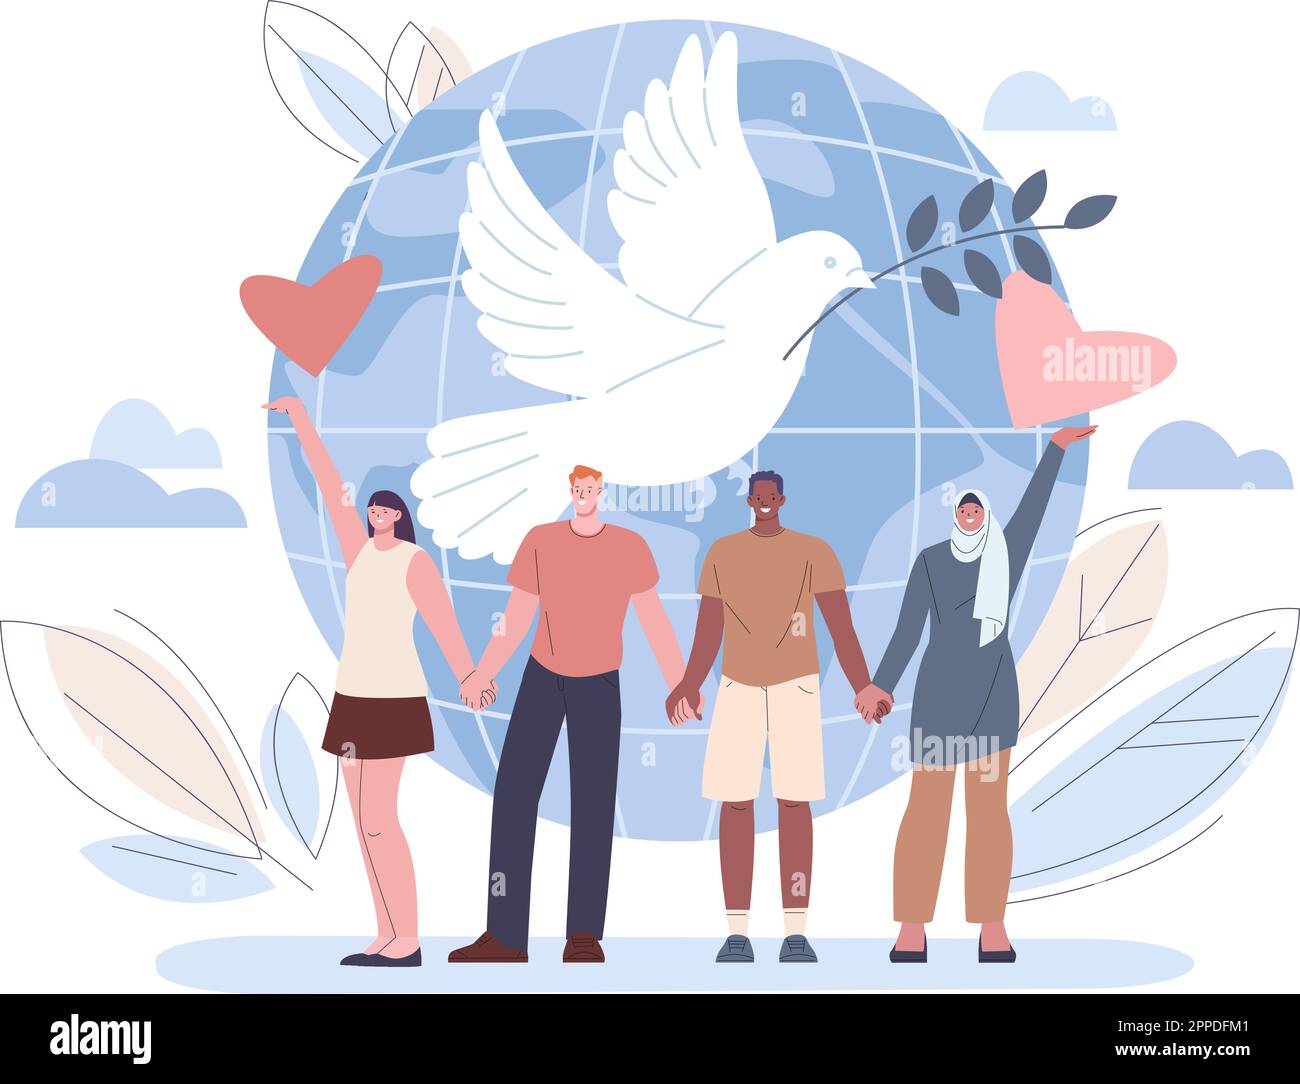 Peace and international friendship concept. Nonviolence, white dove with branch and multicultural people group holding hands, kicky vector scene Stock Vector